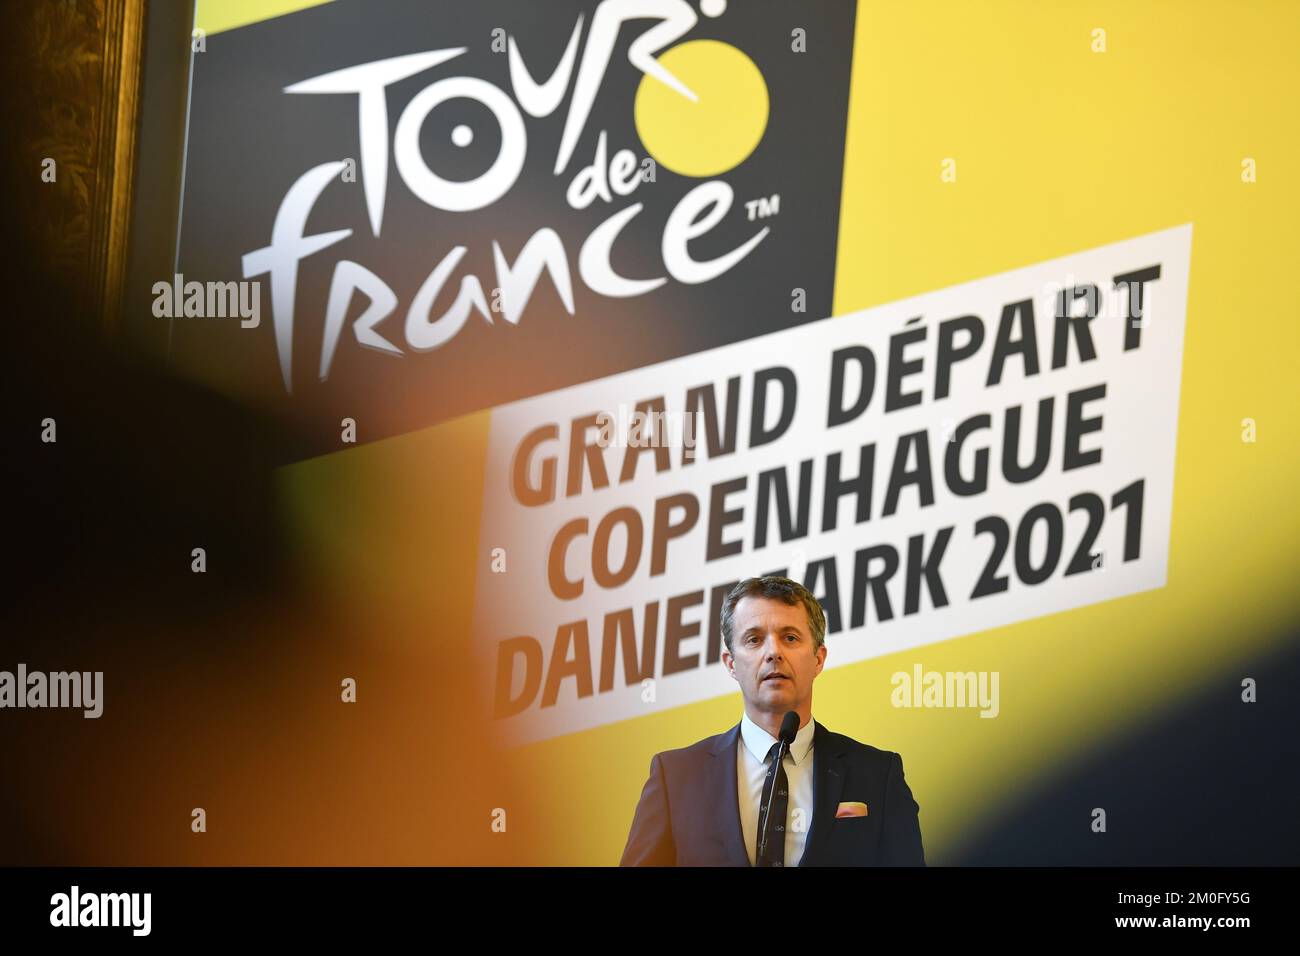 On February 21st 2019 Prime Minister Lars Løkke Rasmussen hosted a press conference at Copenhagen City Hall, where the Danish Tour de France start in 2021 was officially announced. The tour will complete 3 stages in Denmark: A time trial in central Copenhagen and two normal stages from Roskilde to Nyborg over the Great Belt Bridge and from Vejle to Sønderborg. Also in attendance at the press conference were protector for the event HRH Crown Prince Frederik, Tour de France boss Christian Prudhomme, Lord Mayor of Copenhagen Frank Jensen and Minister for Business Rasmus Jarlov. Stock Photo